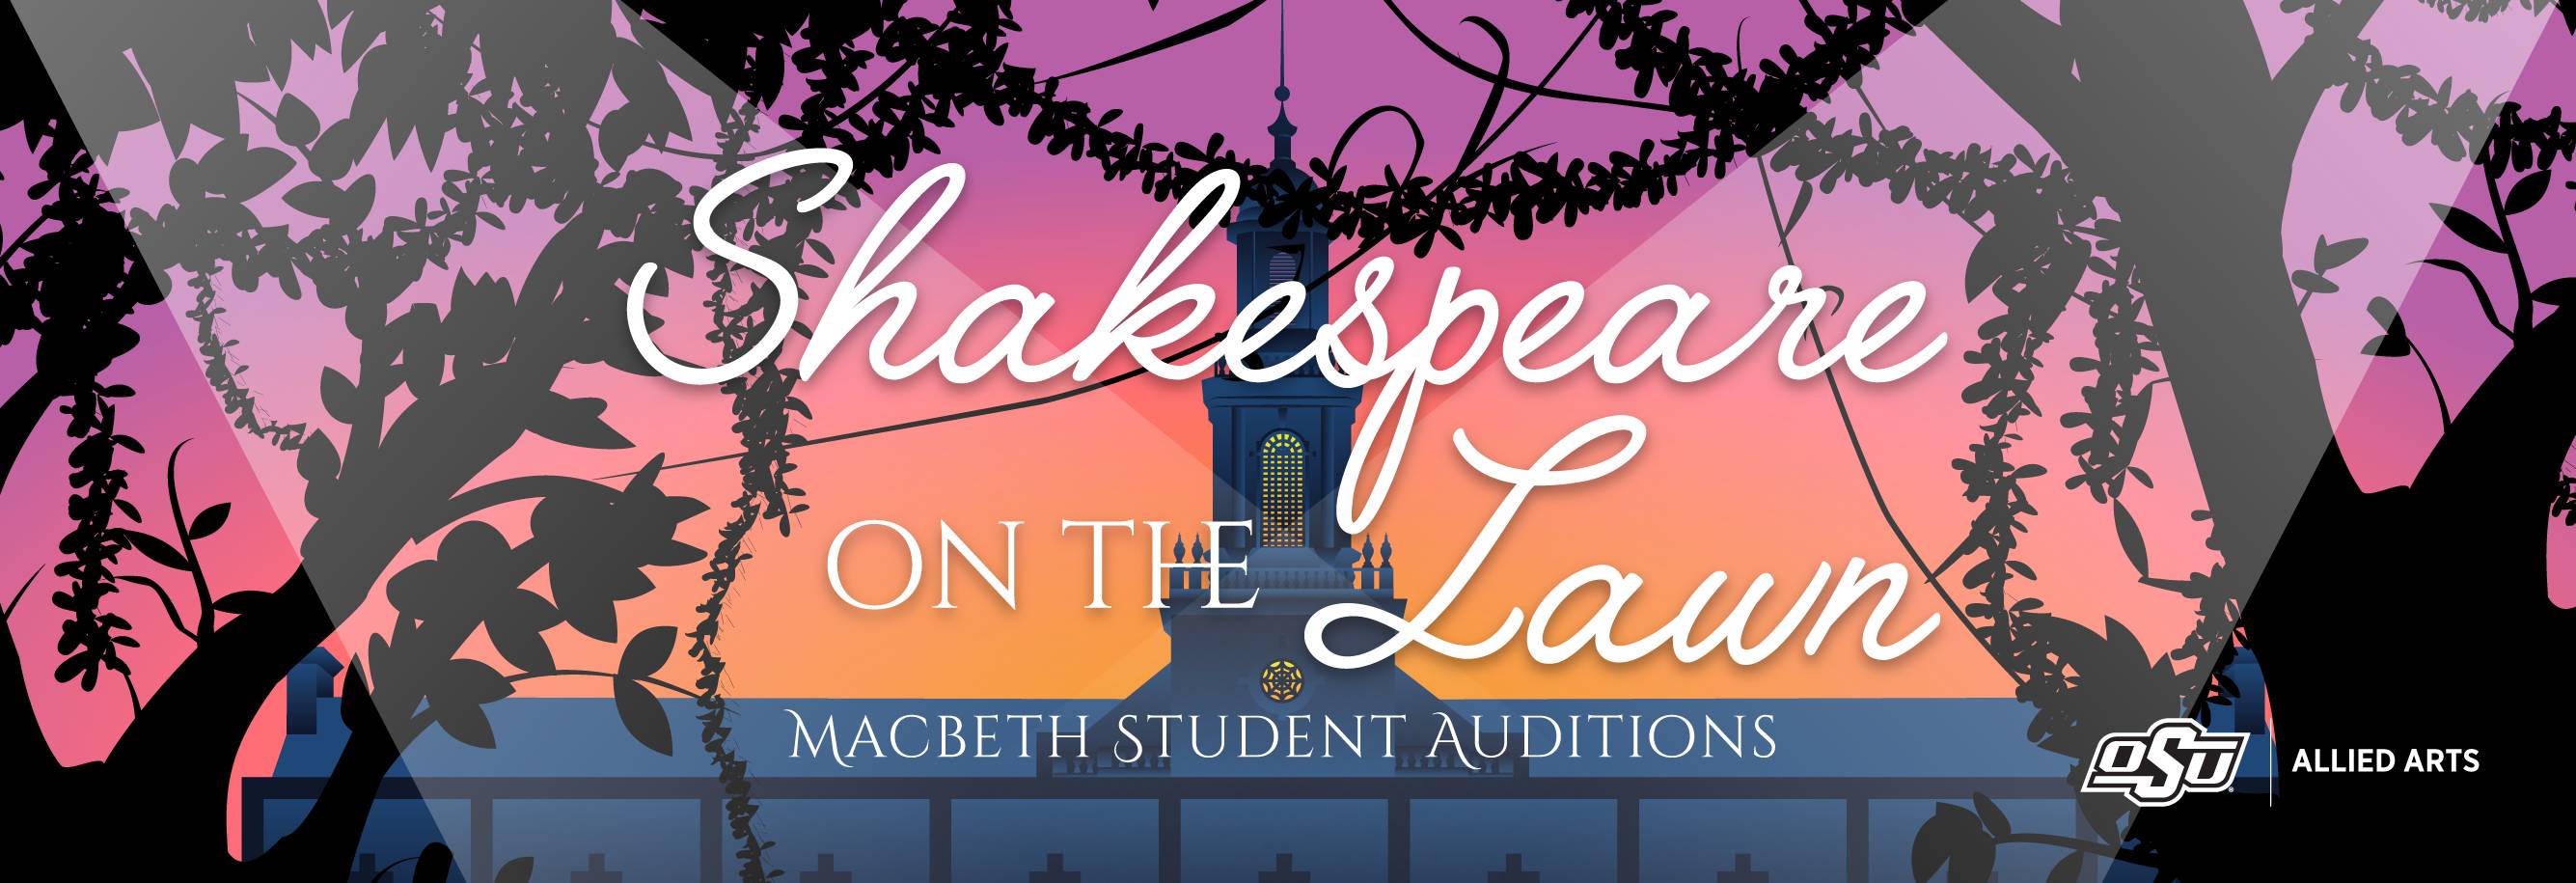 Shakespeare on the Lawn Auditions Web Banner